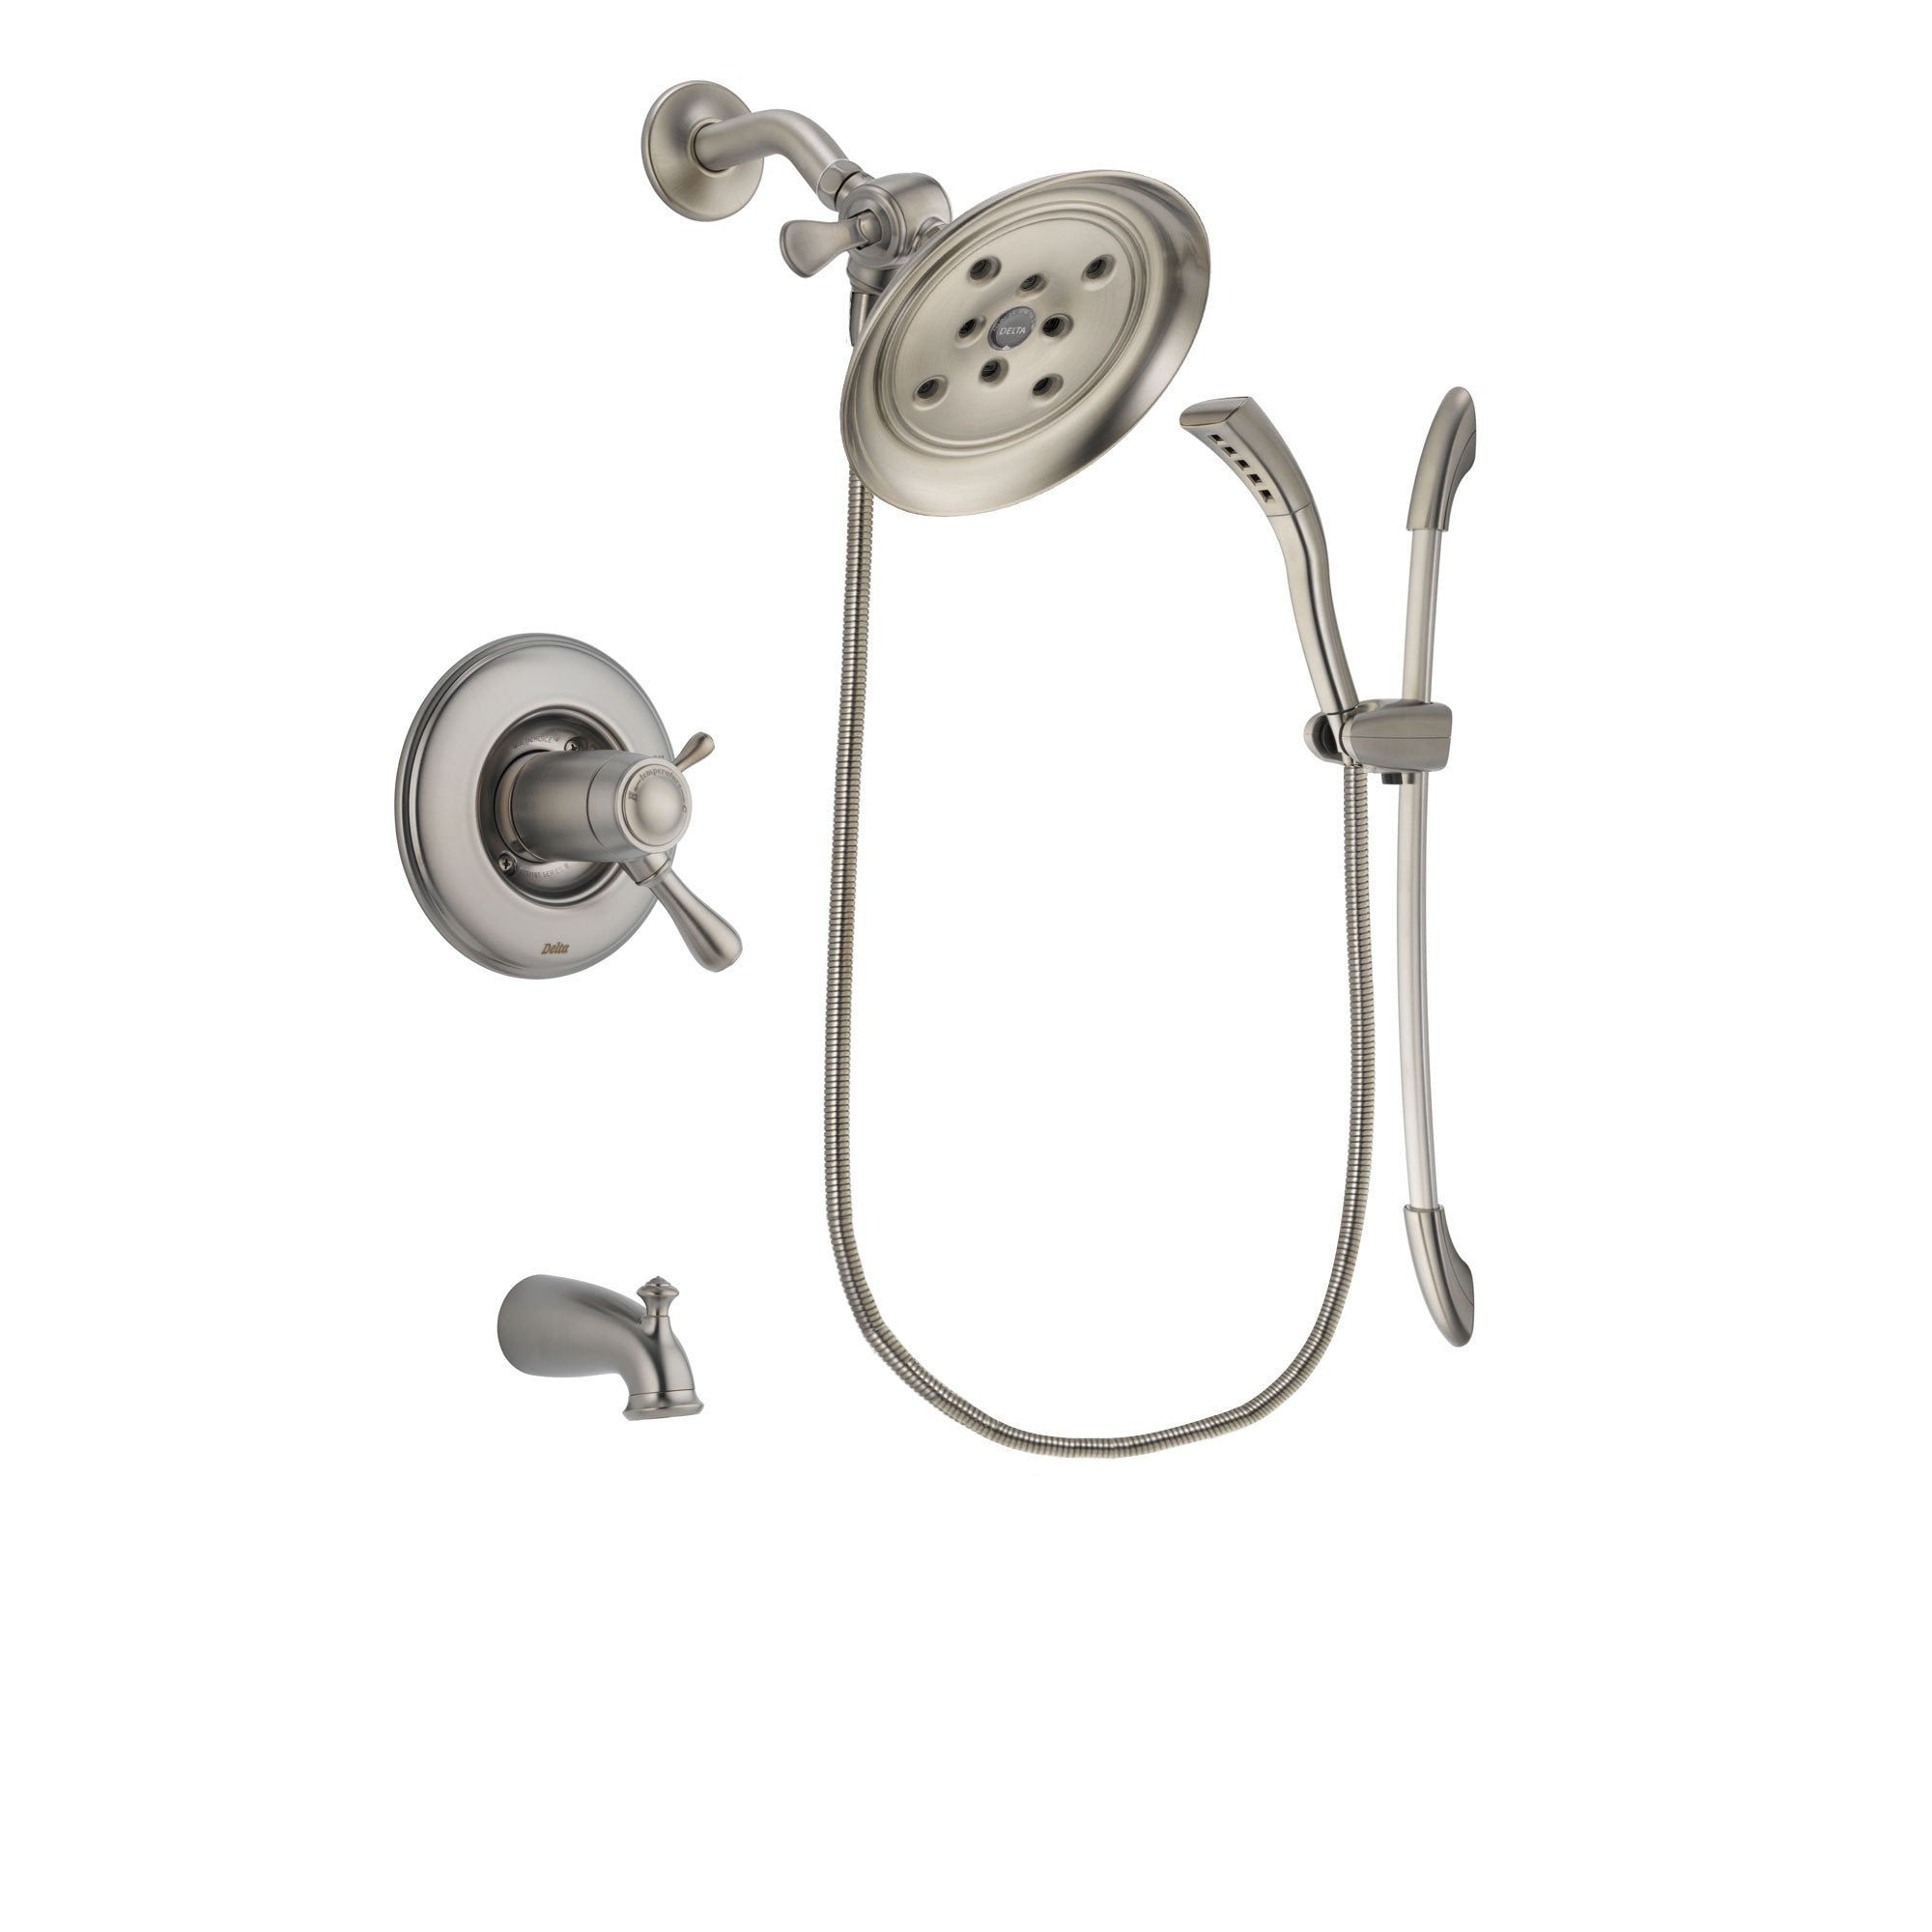 Delta Leland Stainless Steel Finish Thermostatic Tub and Shower Faucet System Package with Large Rain Showerhead and Handshower with Slide Bar Includes Rough-in Valve and Tub Spout DSP1449V